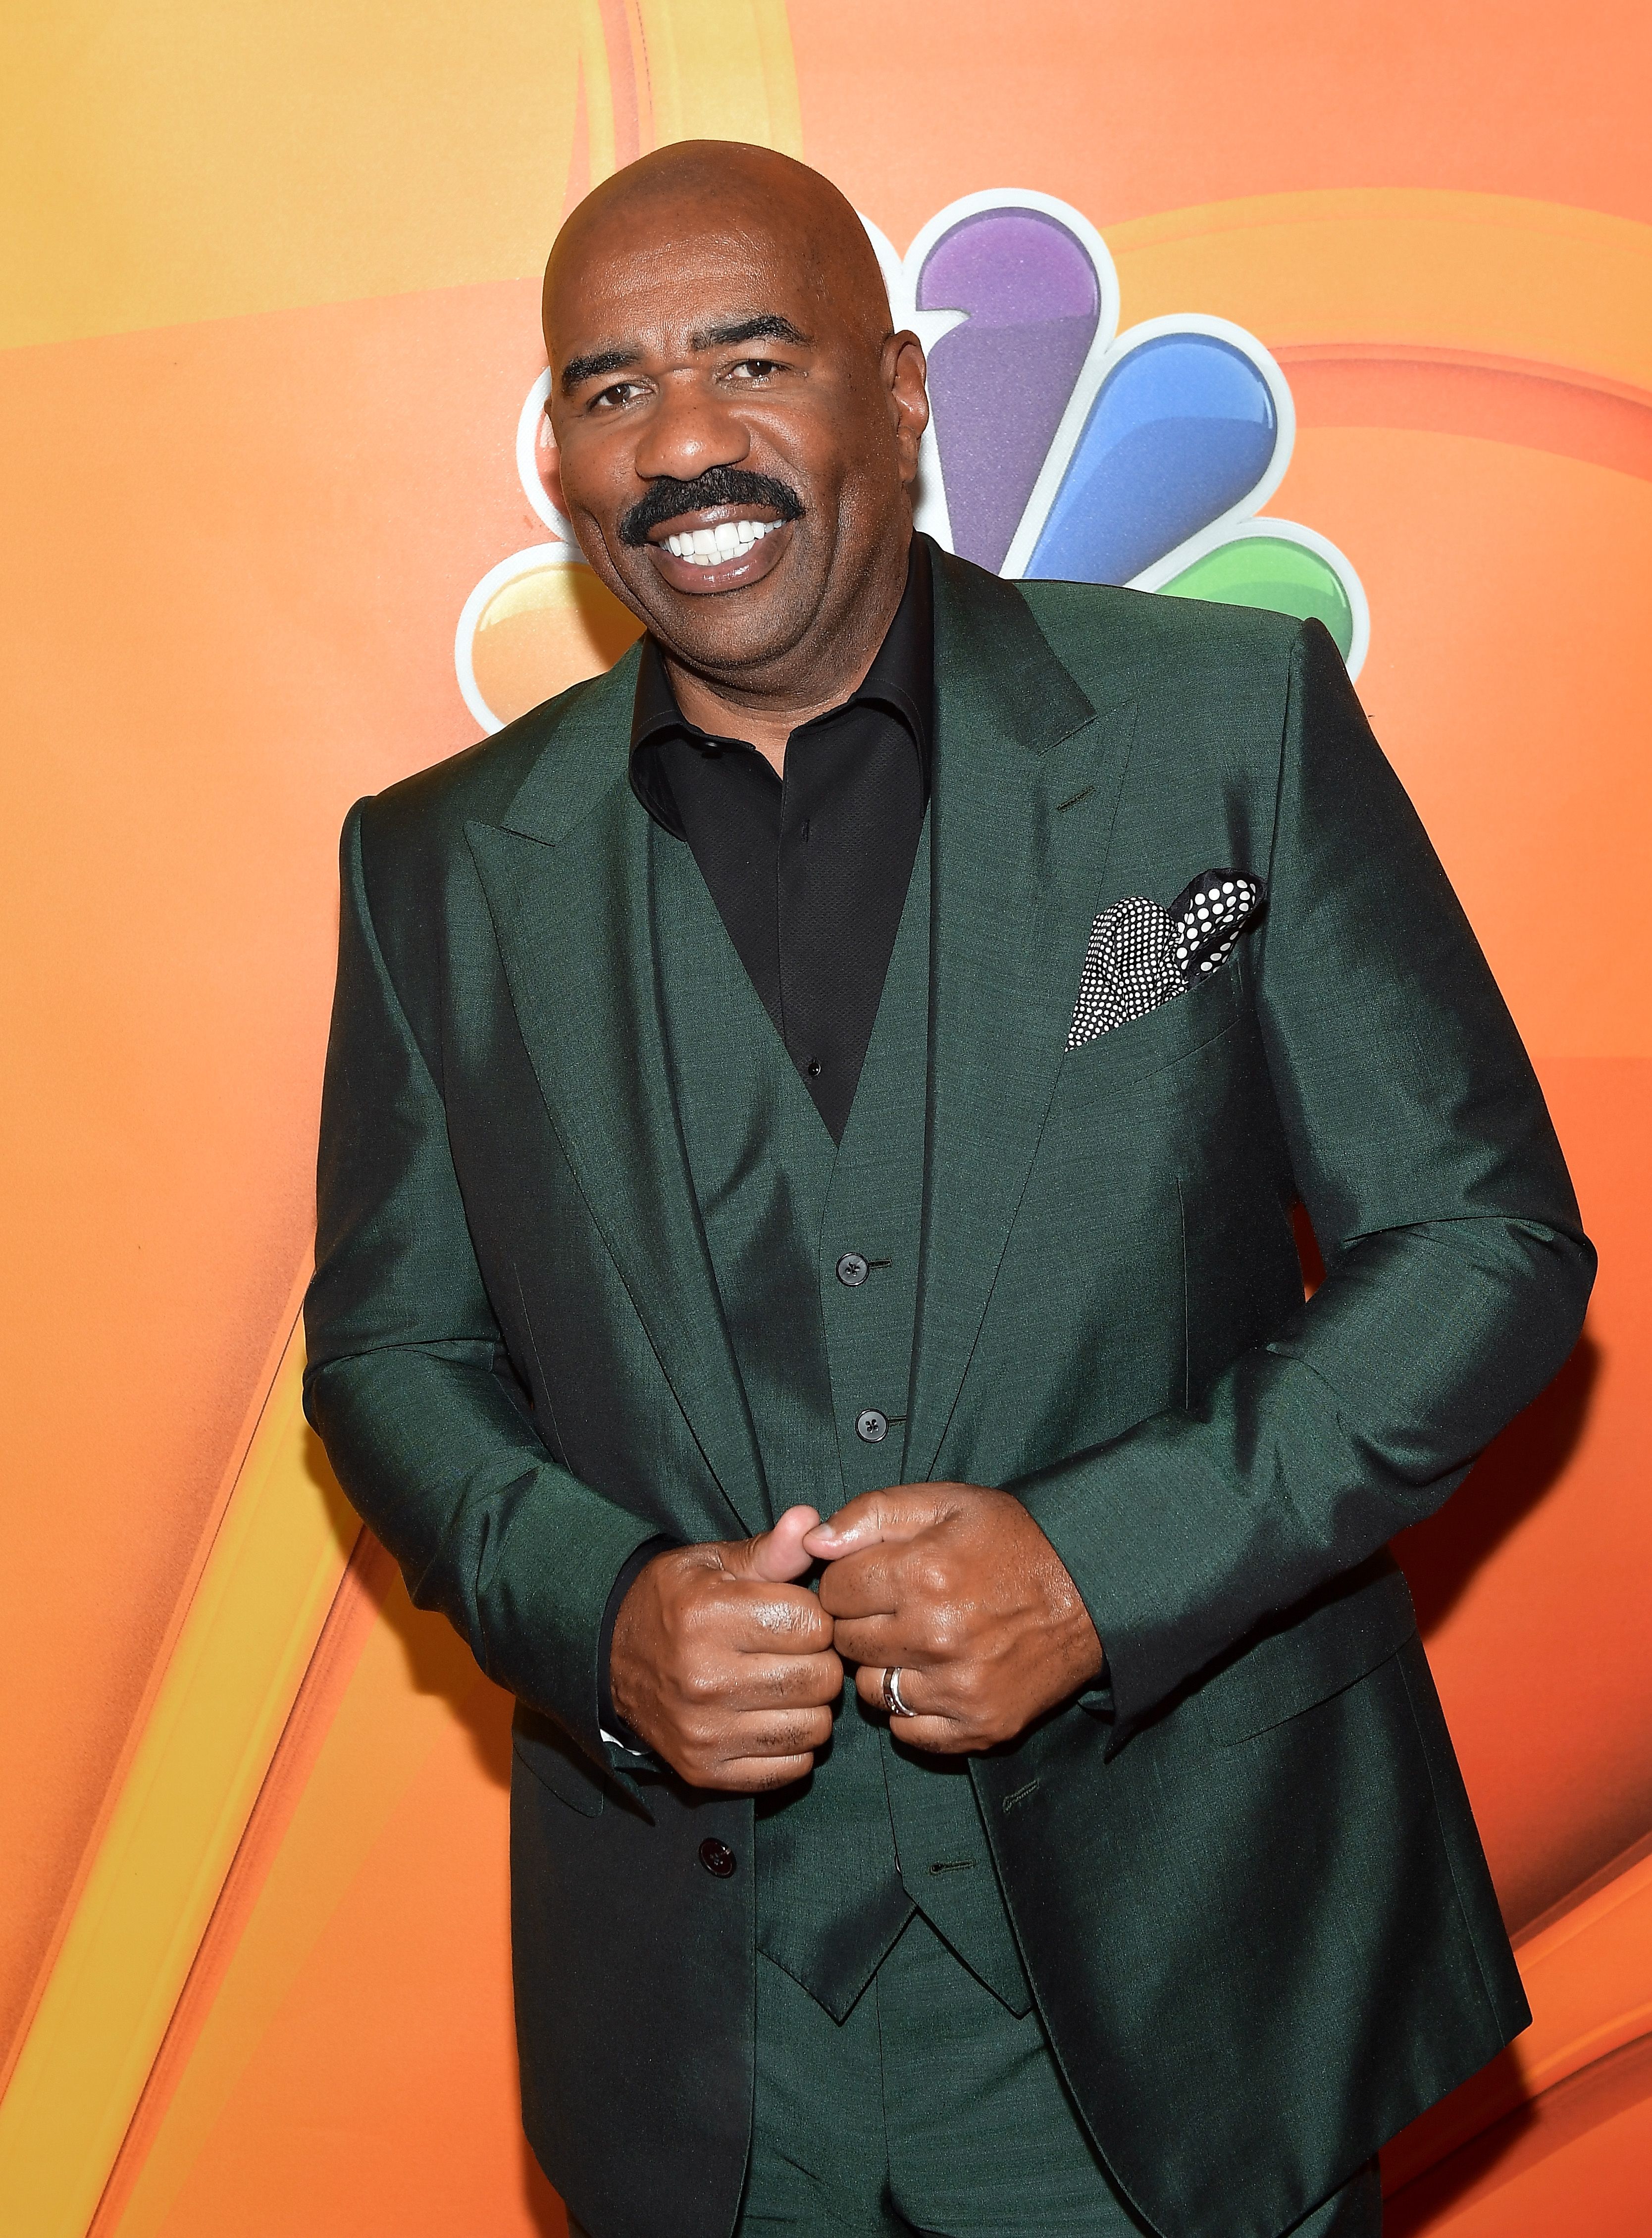 Steve Harvey at the NBCUniversal Summer TCA Press Tour in August 2017. | Source: Getty Images